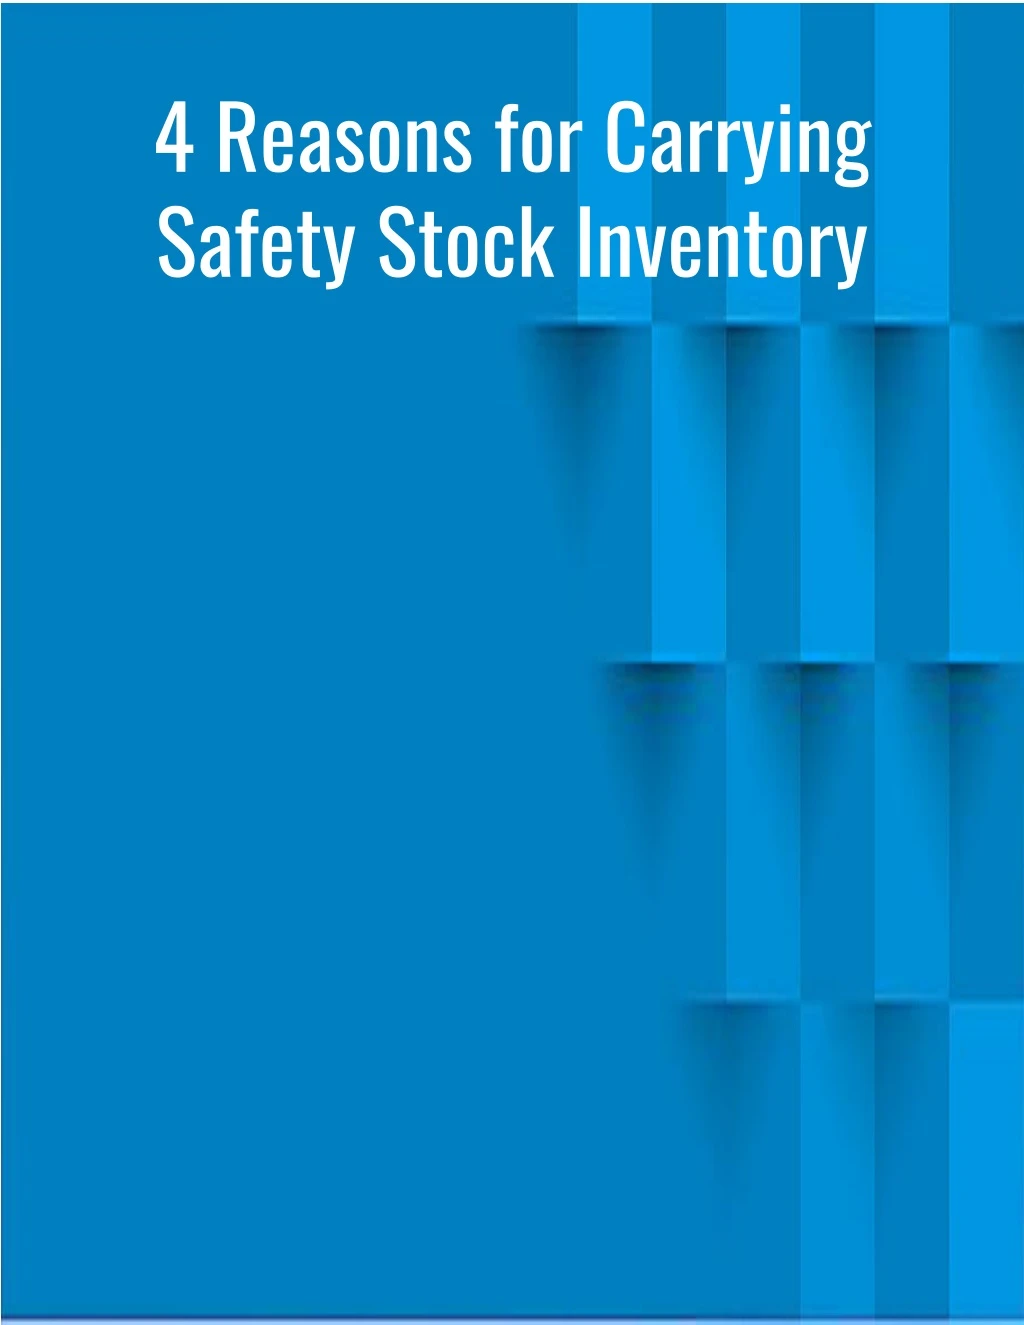 4 reasons for carrying safety stock inventory